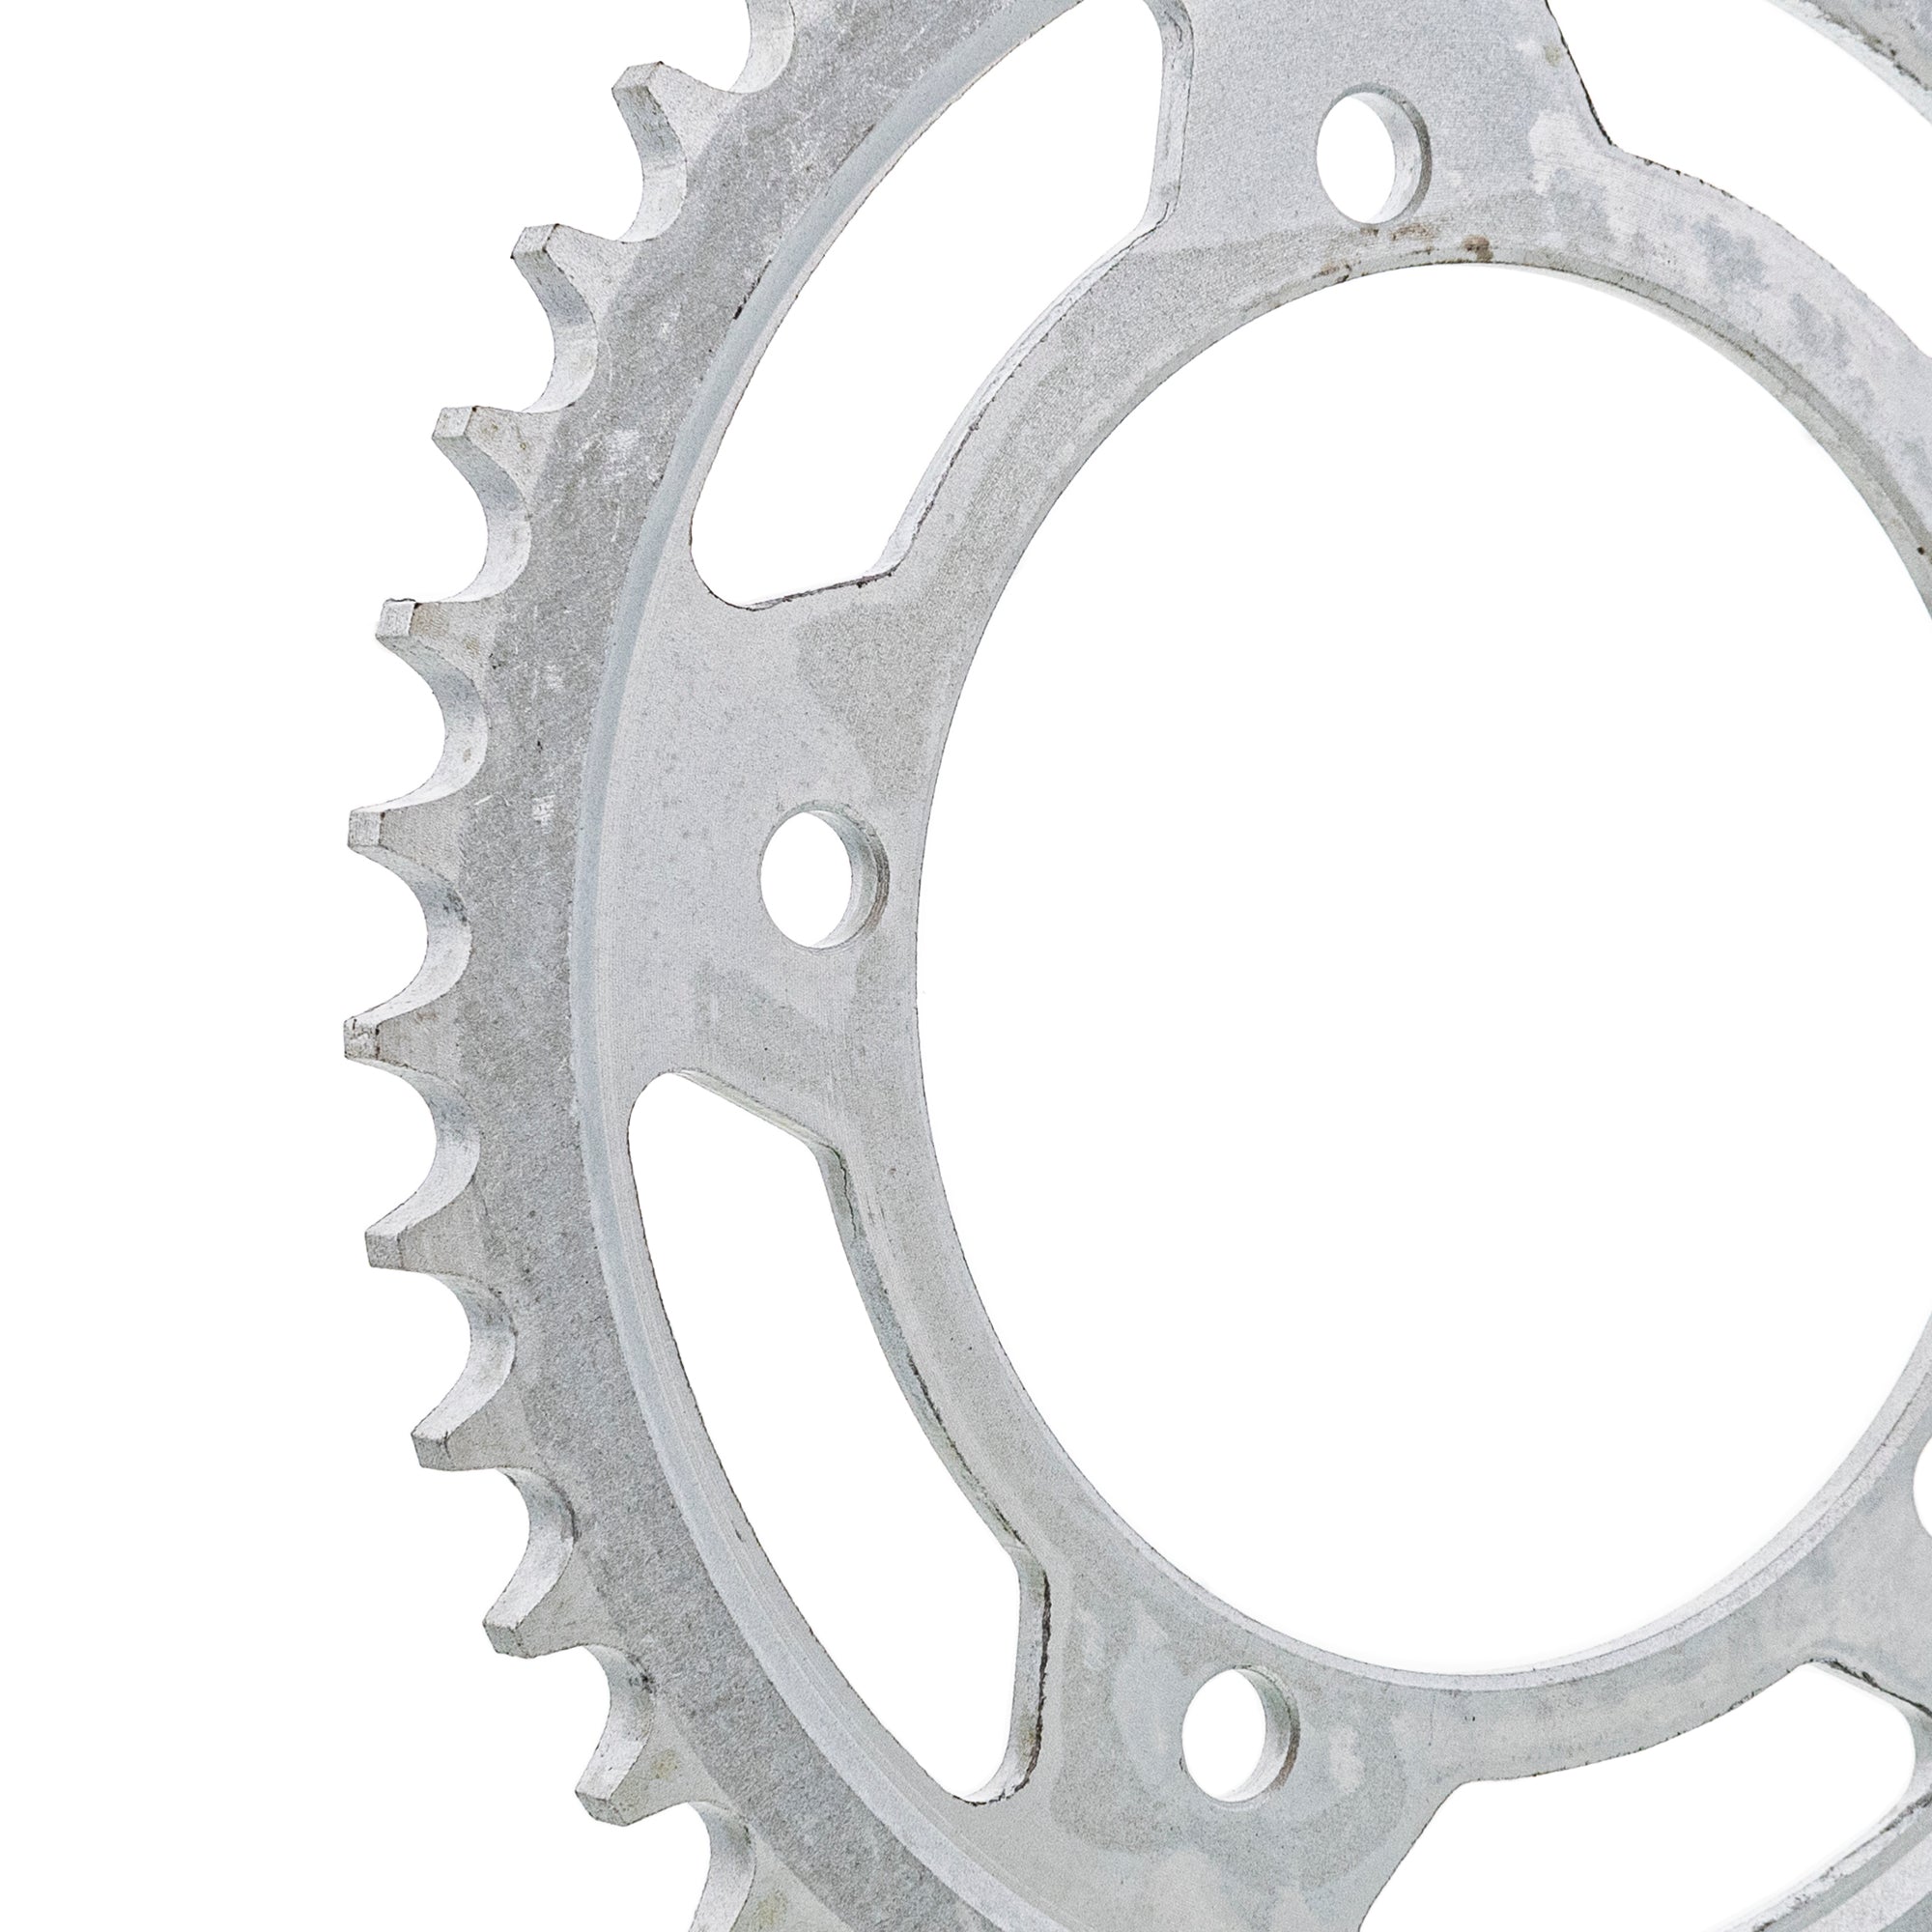 525 17 Tooth Front Drive Sprocket for Triumph America Bonneville